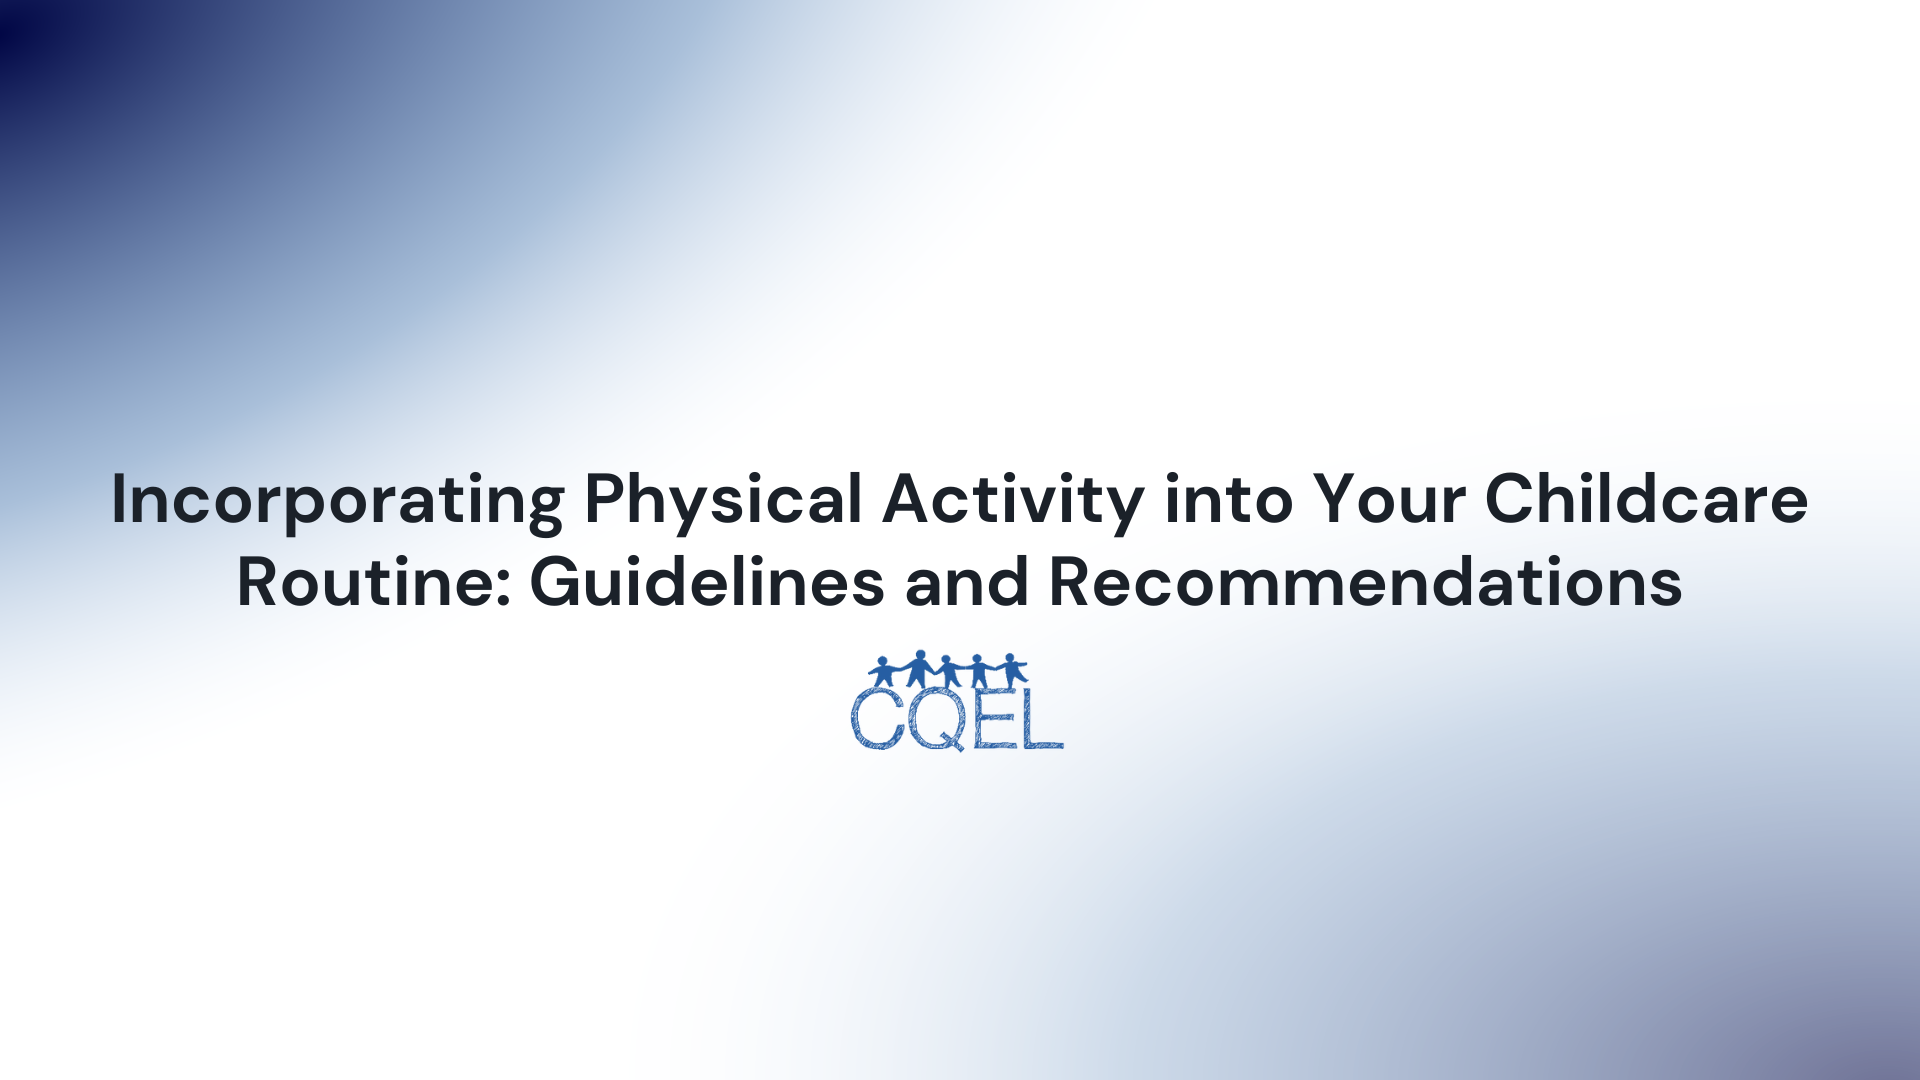 Incorporating Physical Activity into Your Childcare Routine: Guidelines and Recommendations